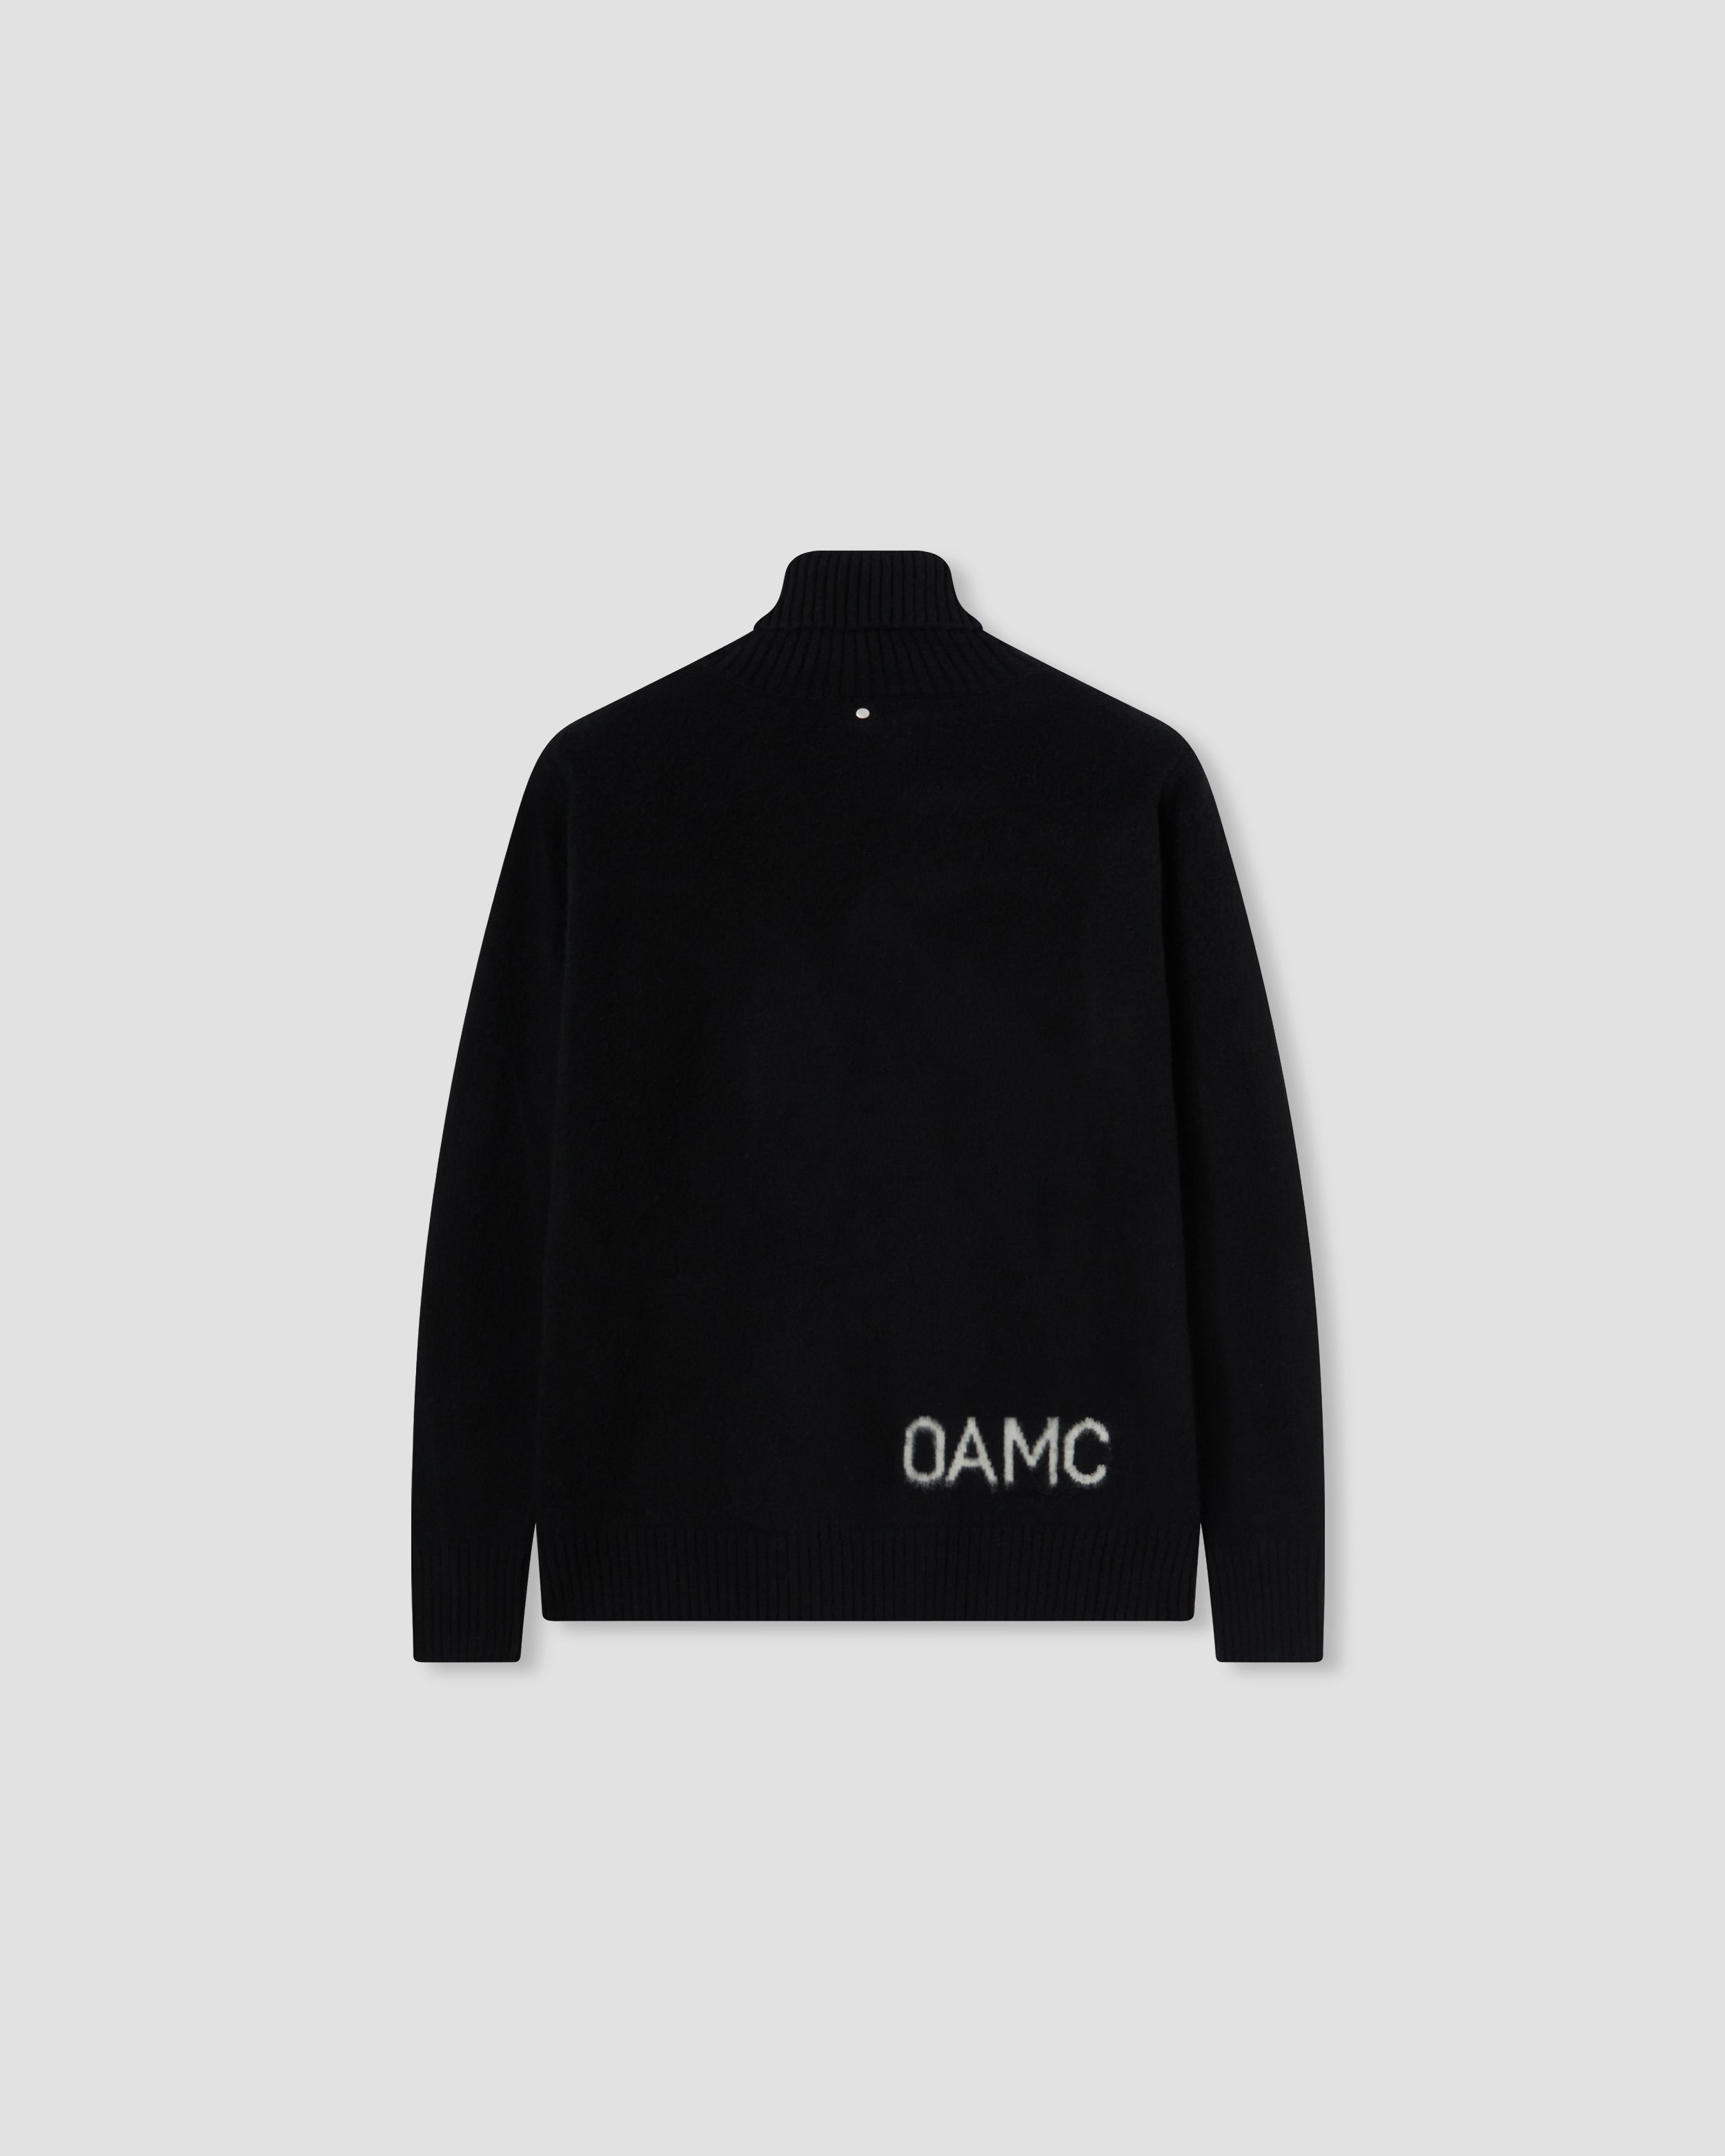 View All | OAMC